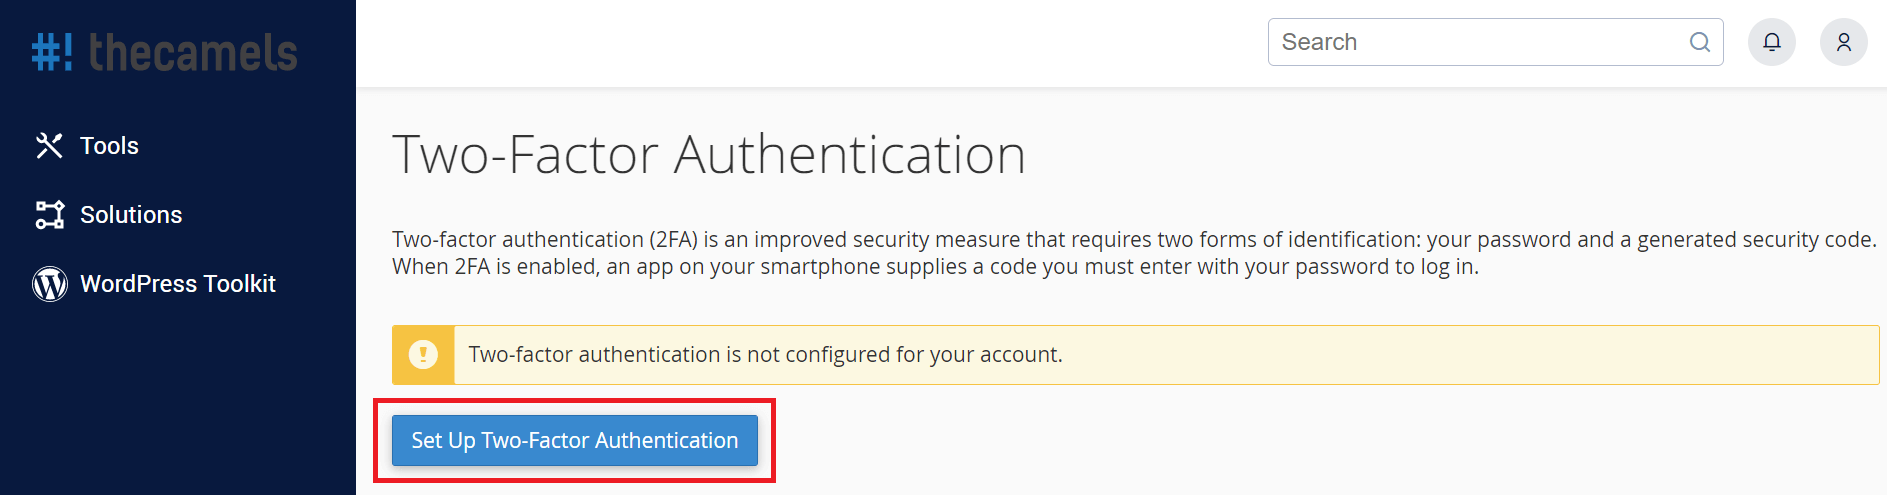 Two-factor authentication - step 2